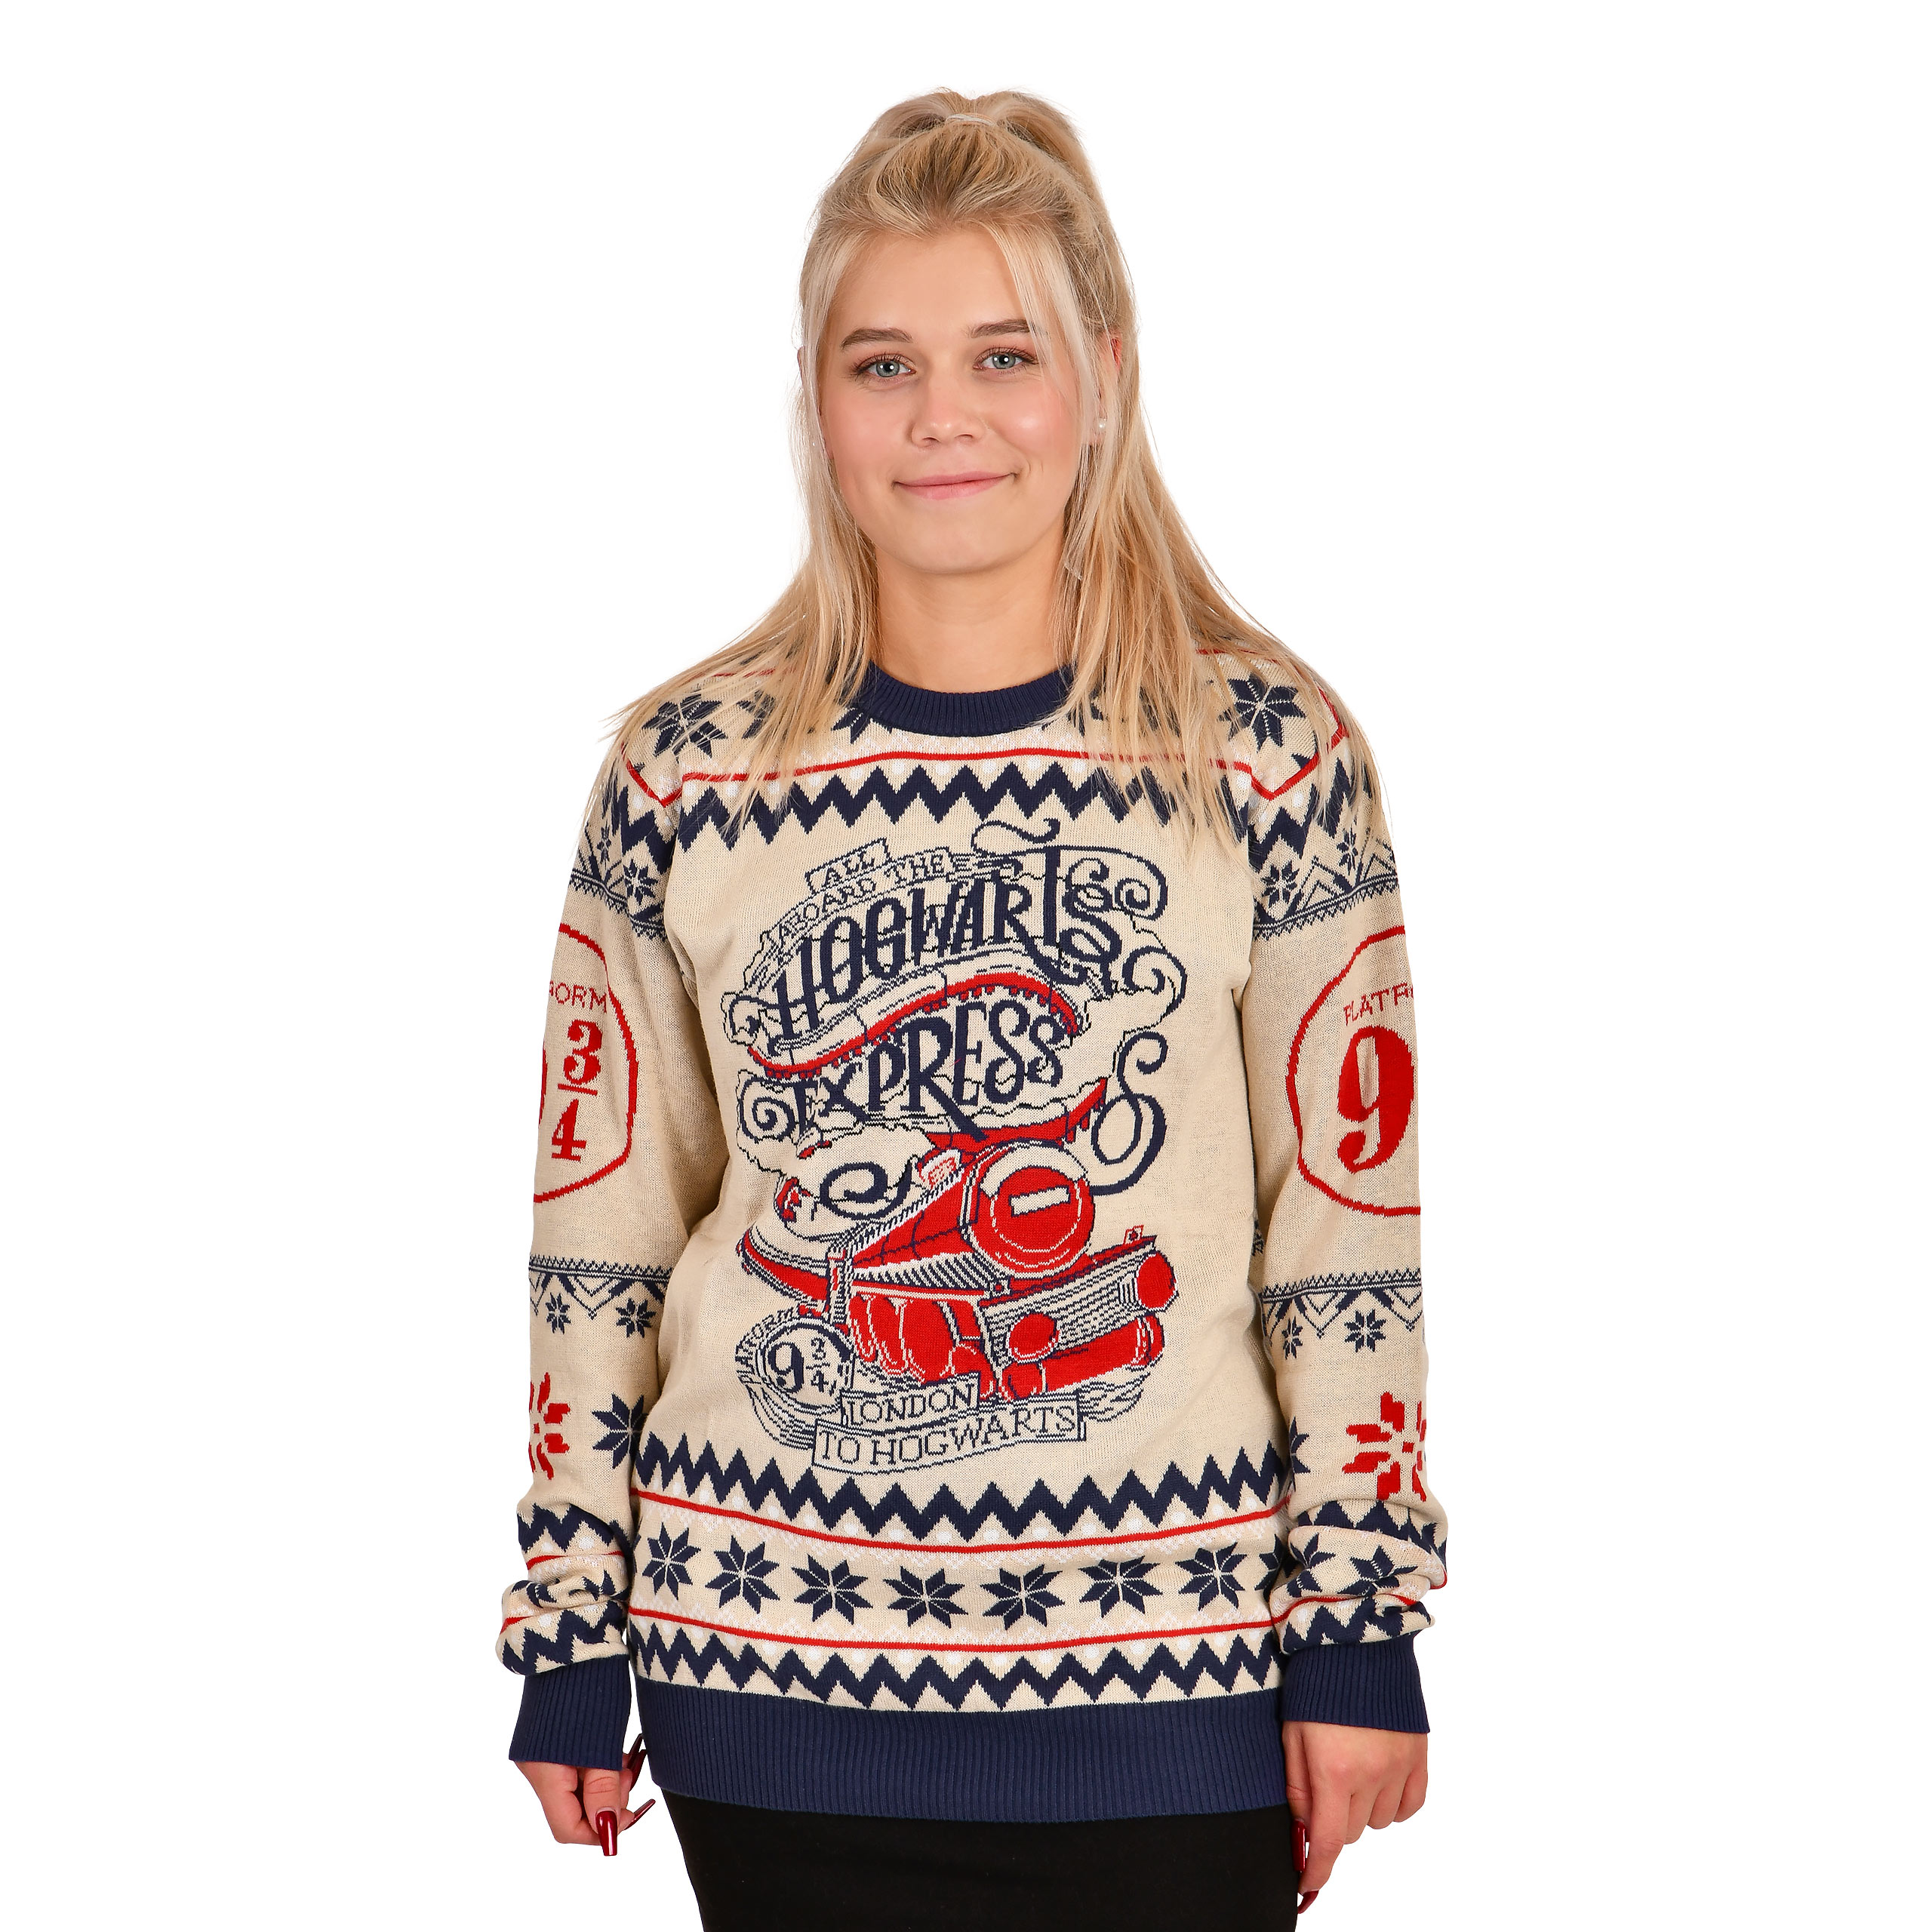 Harry Potter - Hogwarts Express Knitted Sweater